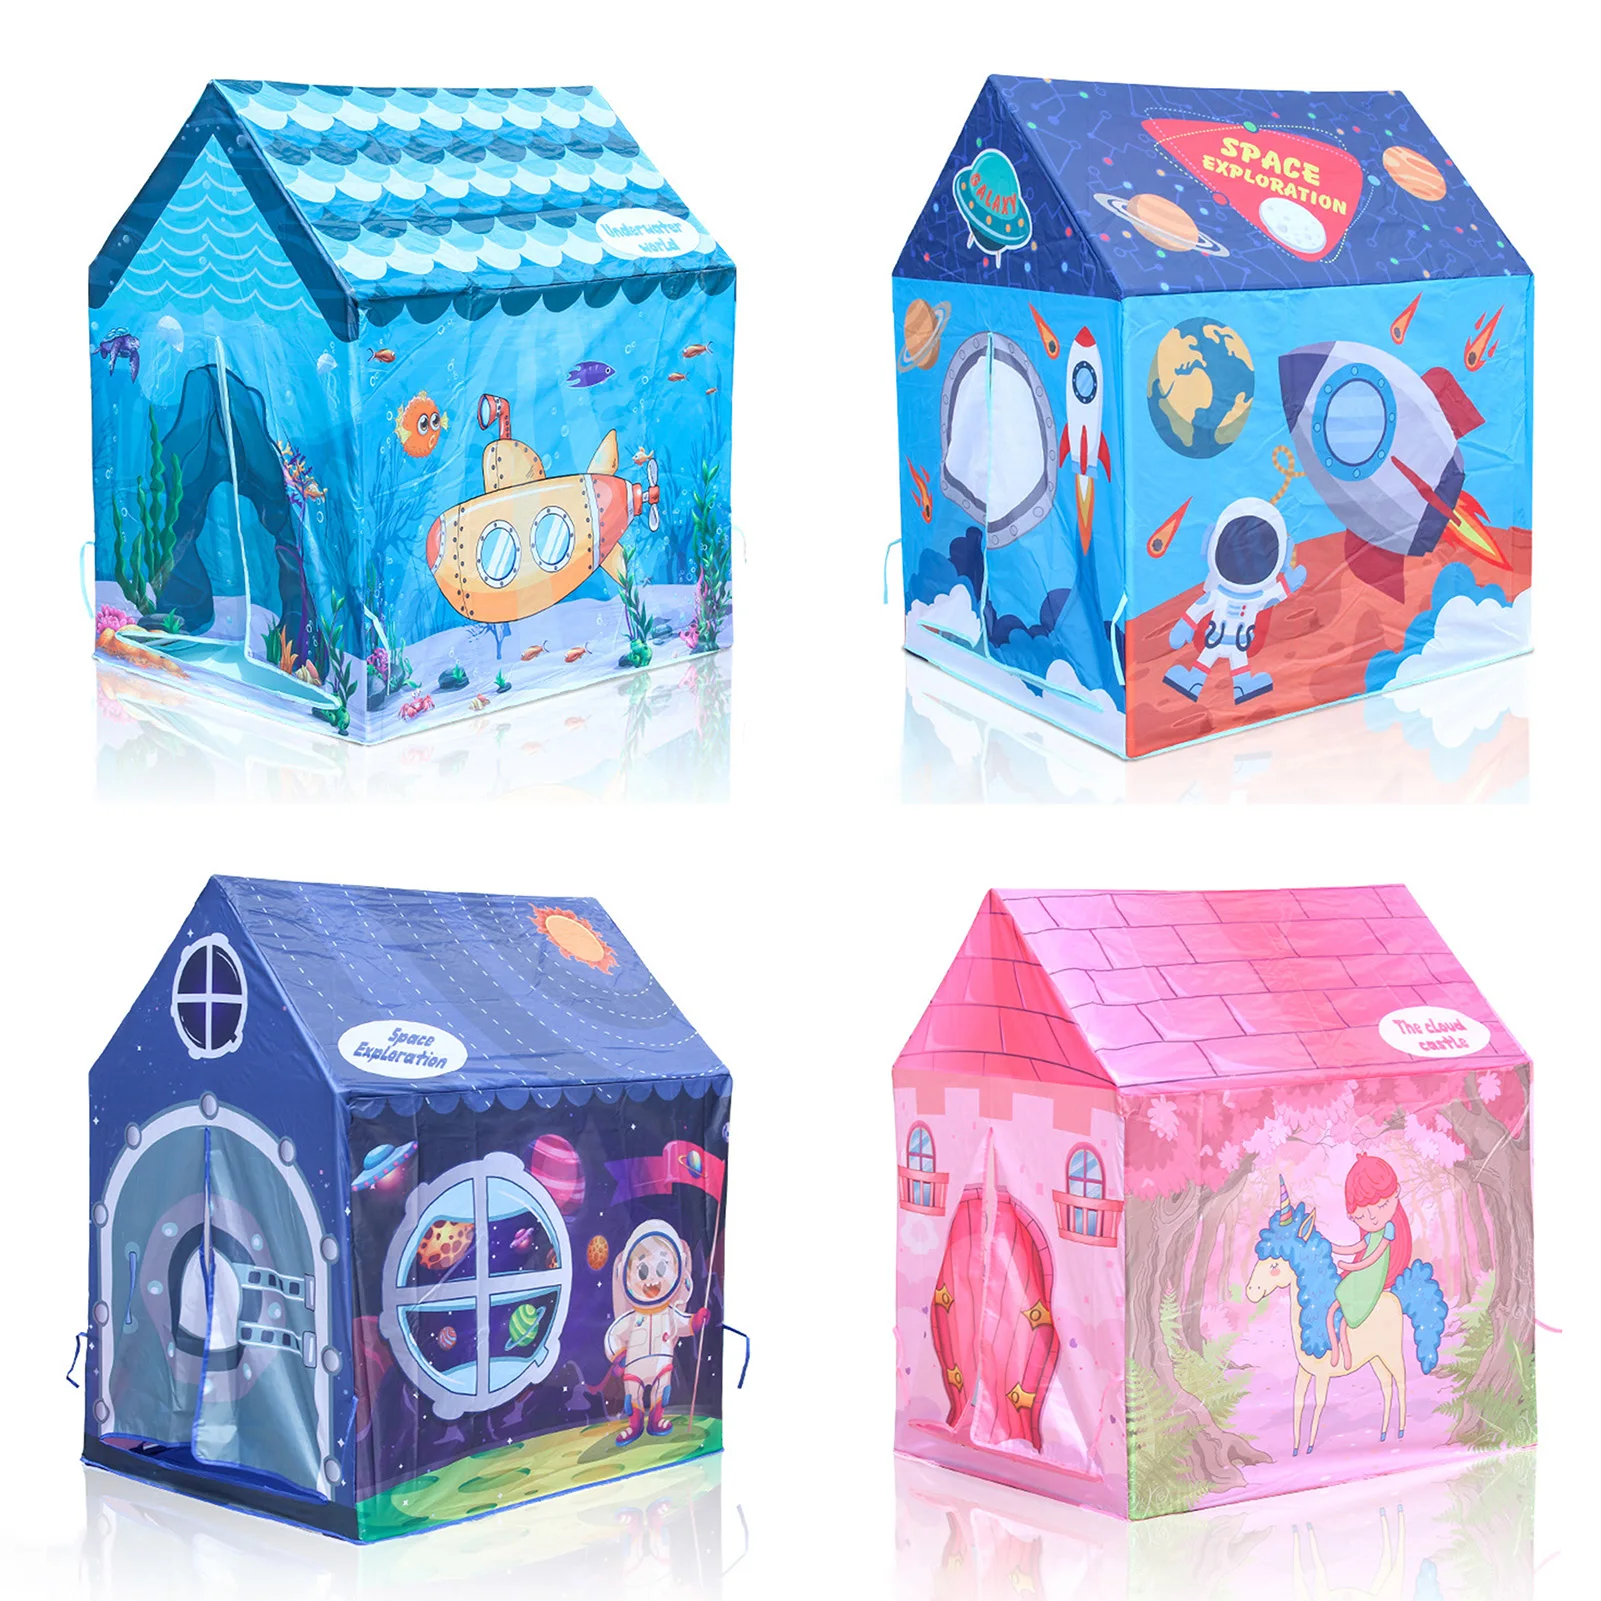 

Portable Children Play Tent Indoor Outdoor Baby Playhouse Infant Toys Ball Pool Castle Pretend Play House Toy Halloween Gift